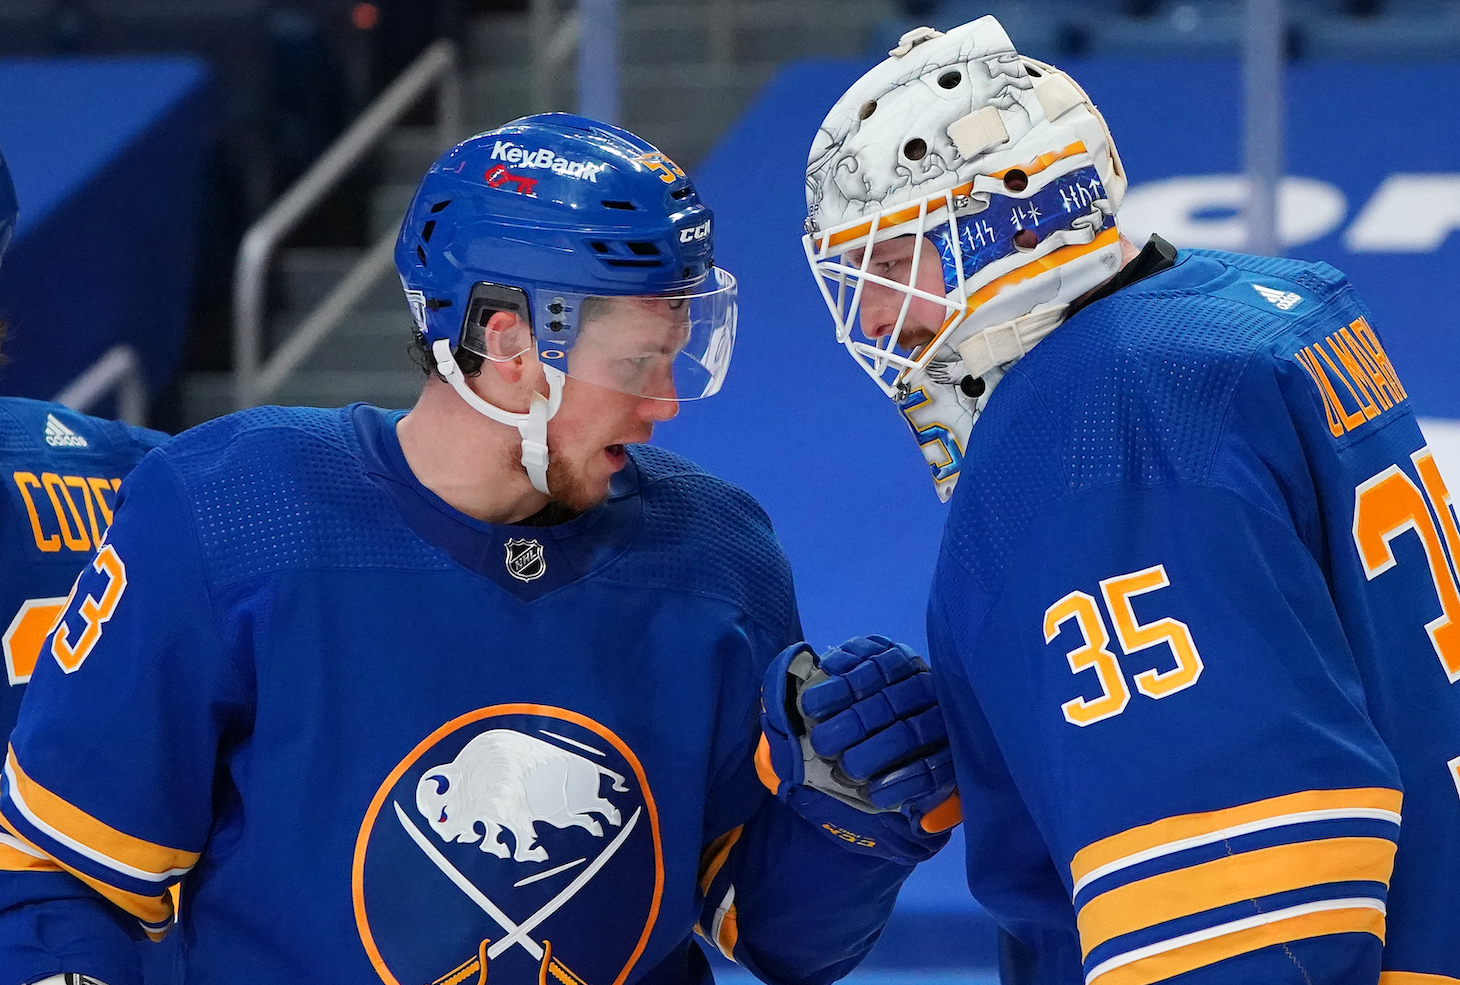 BUFFALO, NY - JANUARY 26: Jeff Skinner #53 of the Buffalo Sabres congratulates Linus Ullmark #35 after beating the New York Rangers at KeyBank Center on January 26 , 2021 in Buffalo, New York. (Photo by Kevin Hoffman/Getty Images)